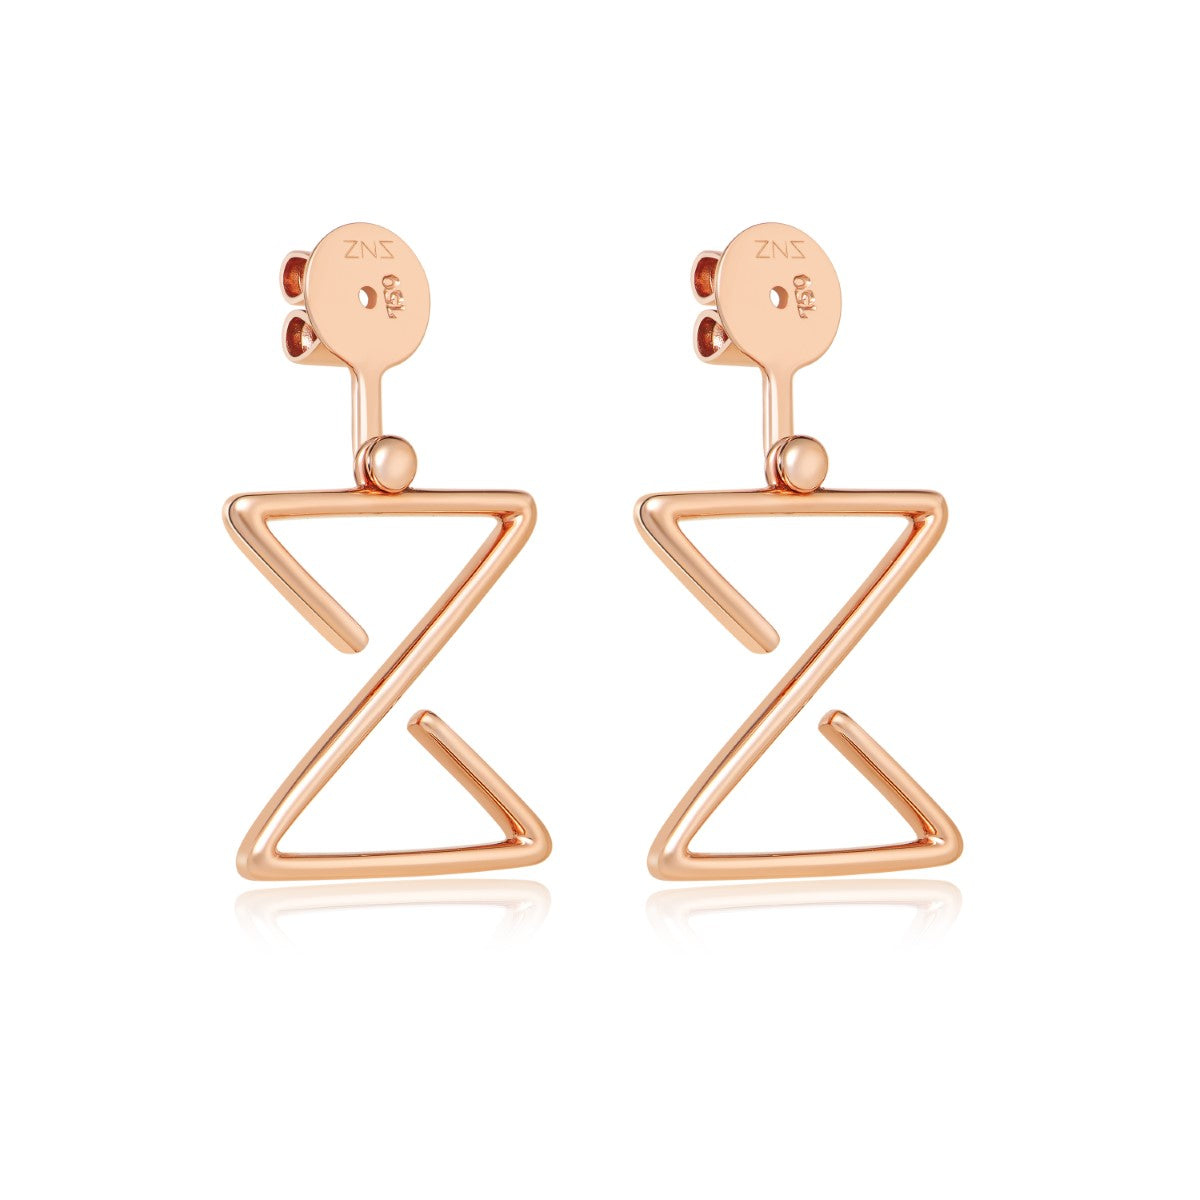 Earring Extensions in 18K Rose Gold - ZNS Jewellery